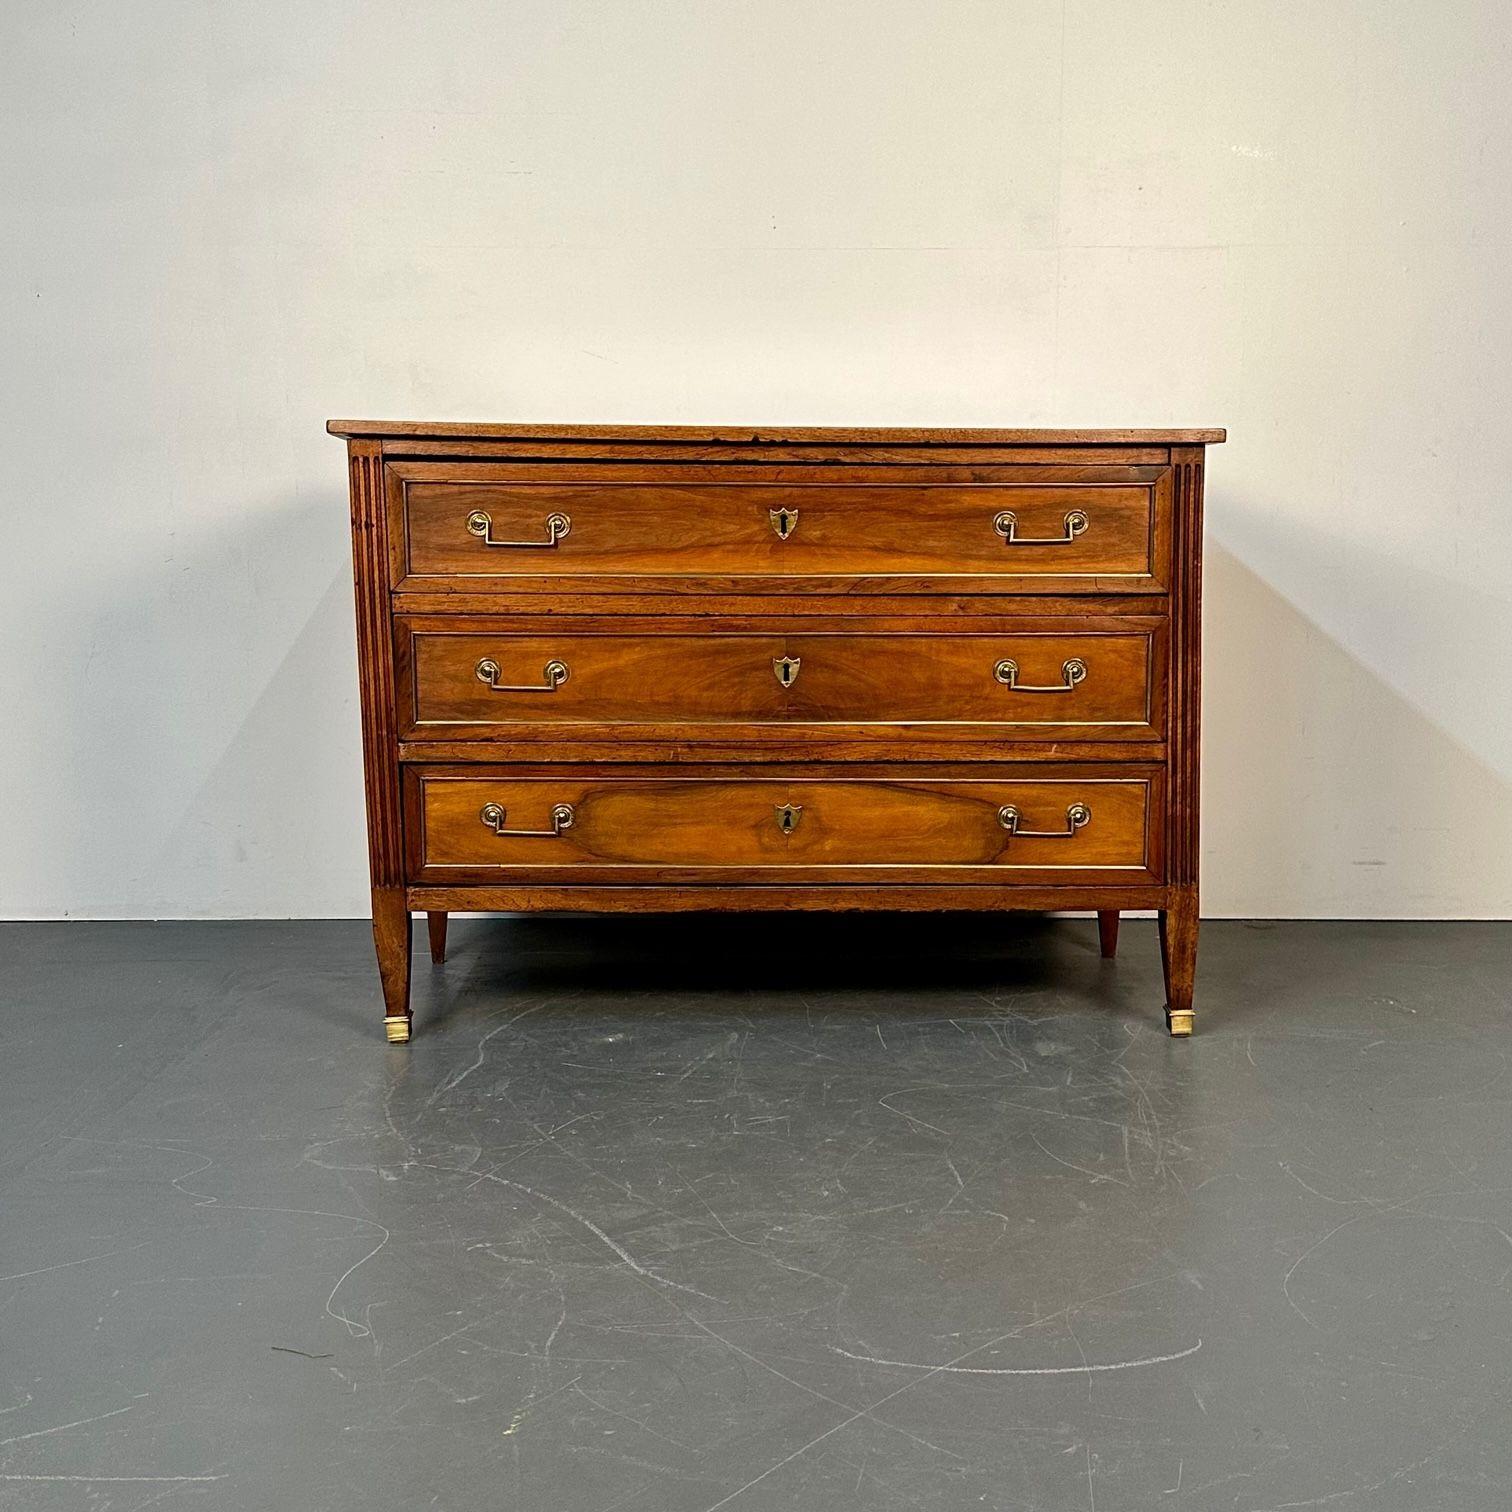 18th Century French Louis XVI Mahogany Commode / Chest, Bronze Accent
A late 18th Century Chest of Drawers in the Louis XVI Fashion having three bronze framed drawers each having bronze drawer pulls. The case framed in bronze on bronze sabots. The